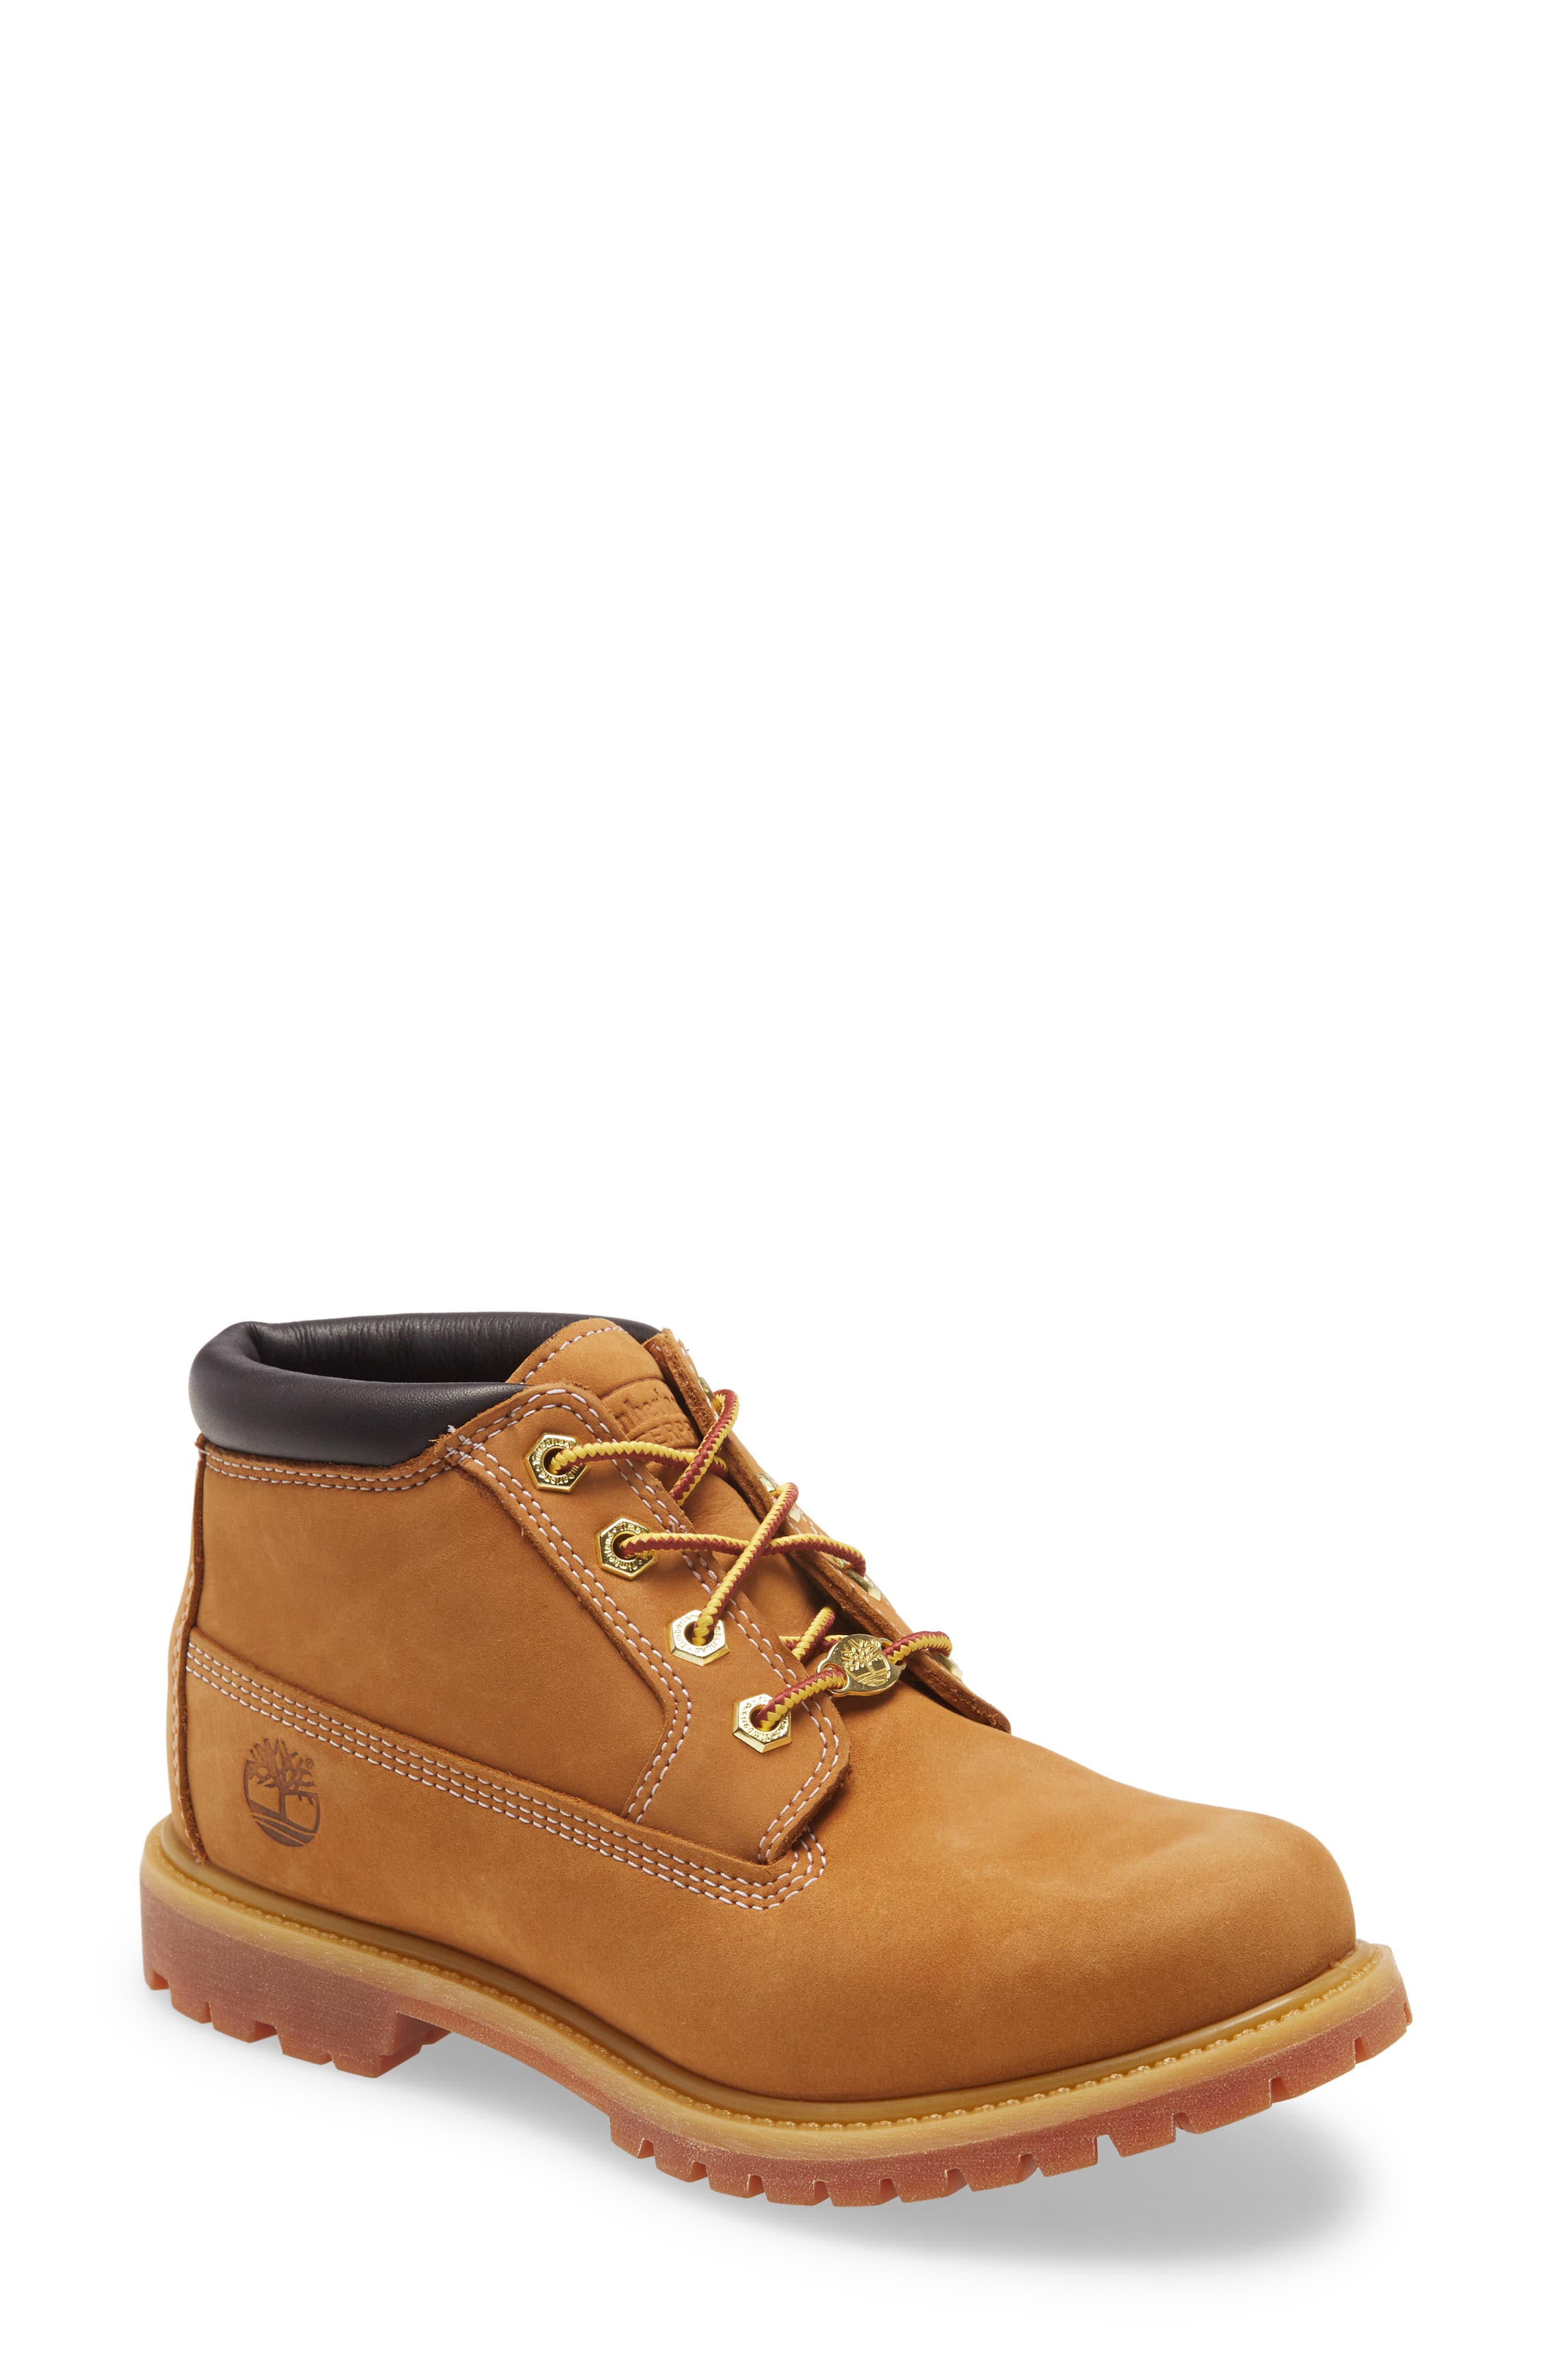 timberland shoes nordstrom